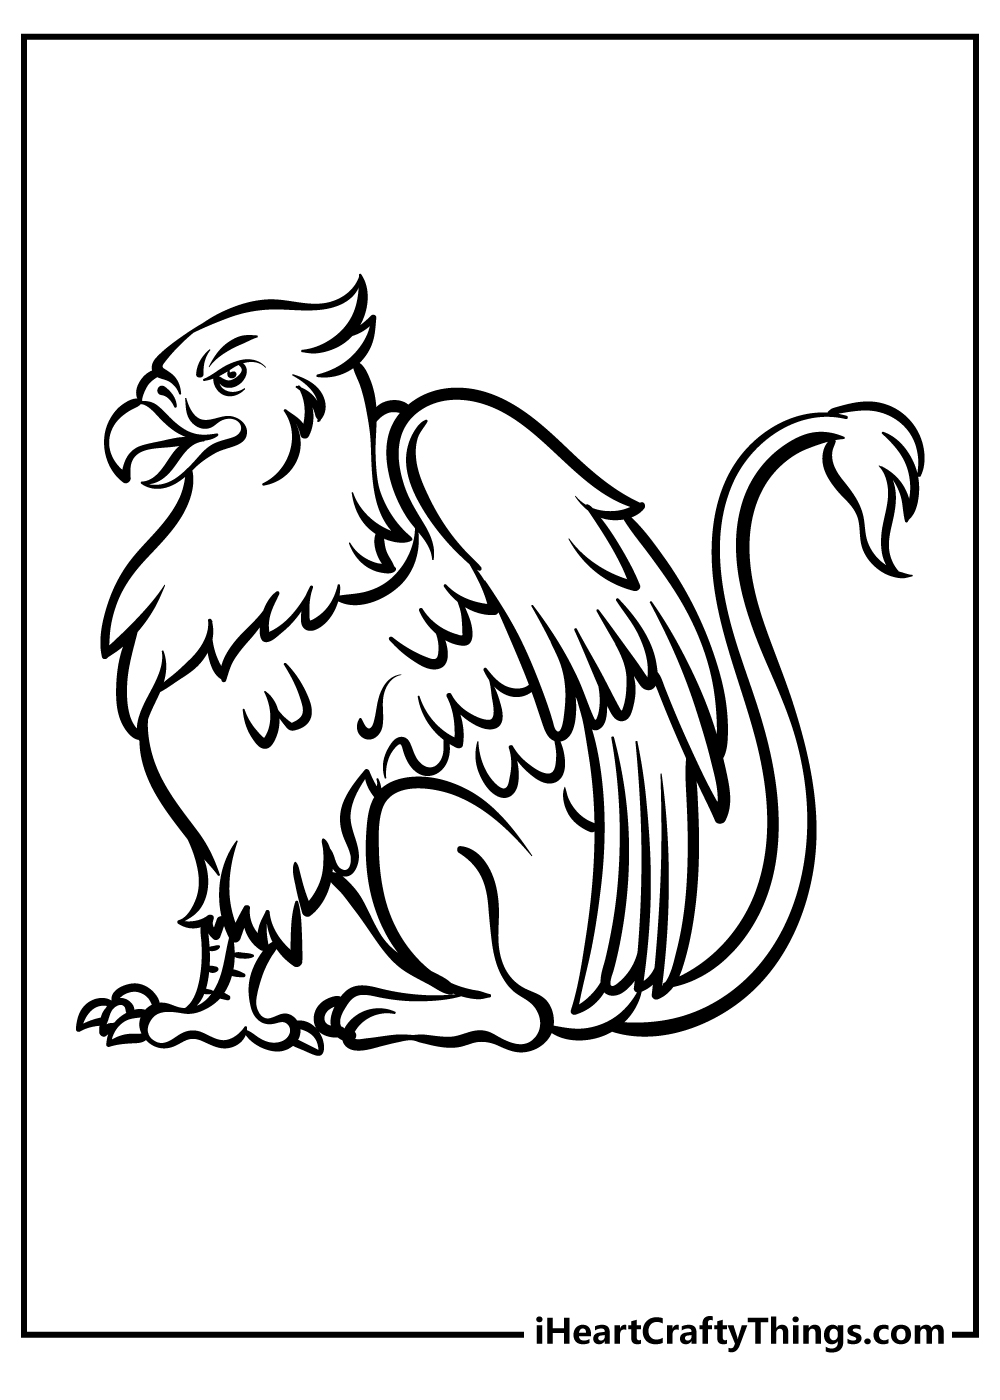 Griffin Coloring Pages for kids free download